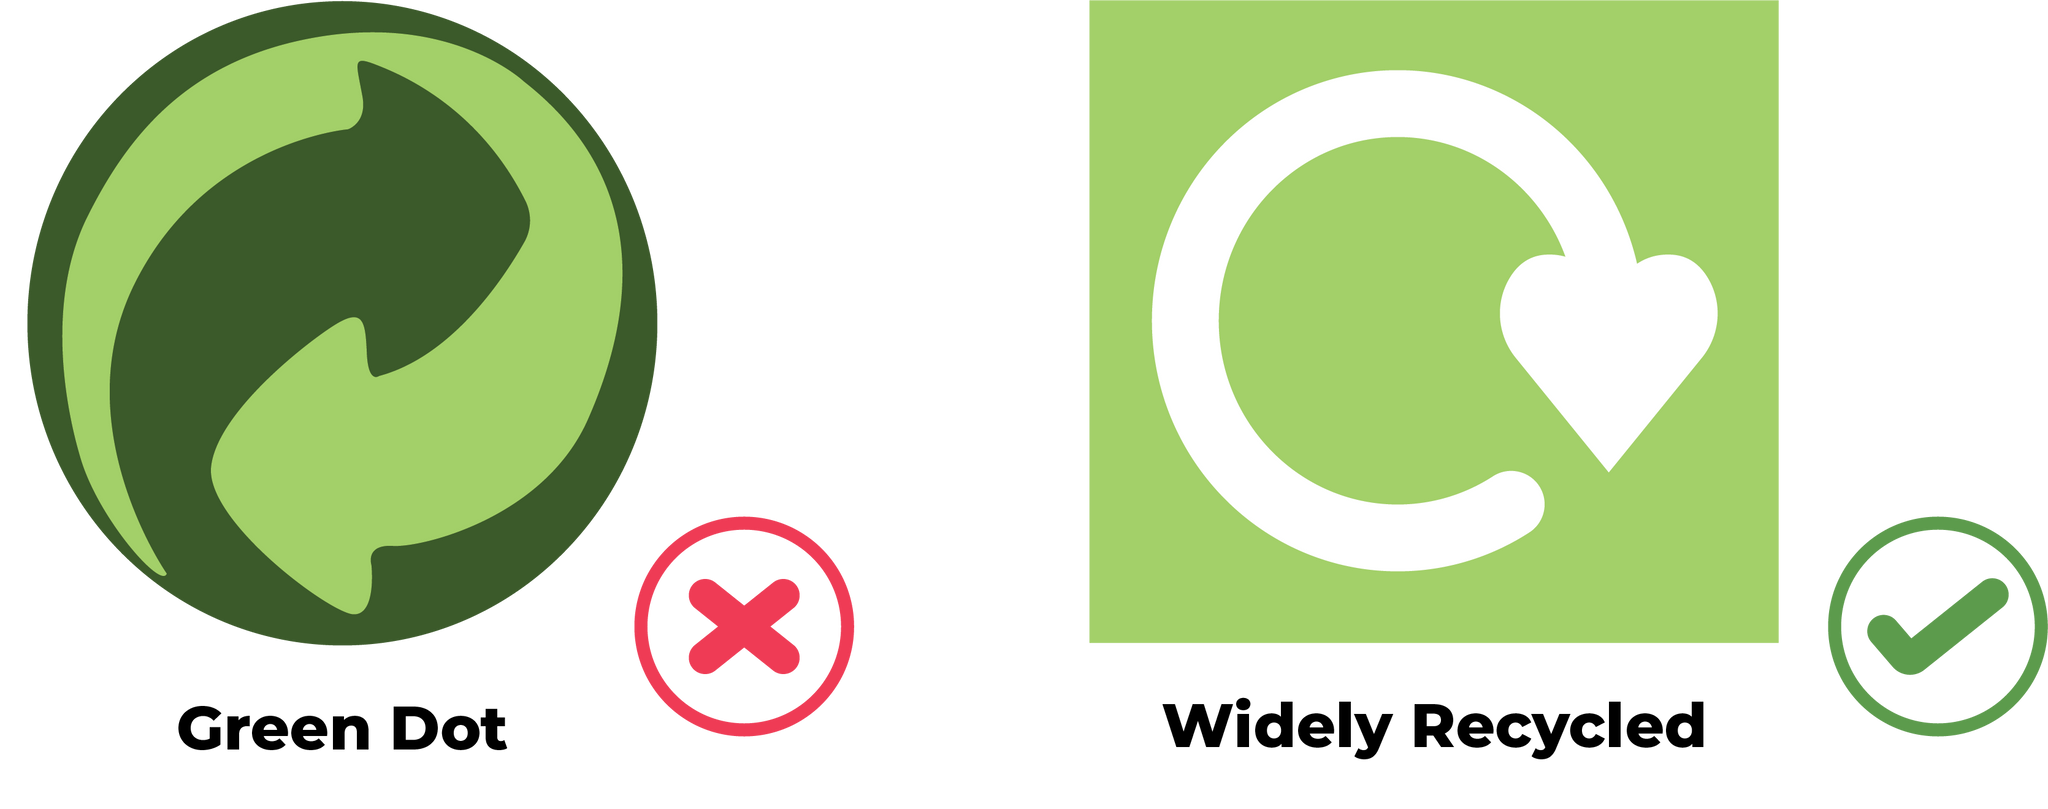 green dot and widely recycled symbols